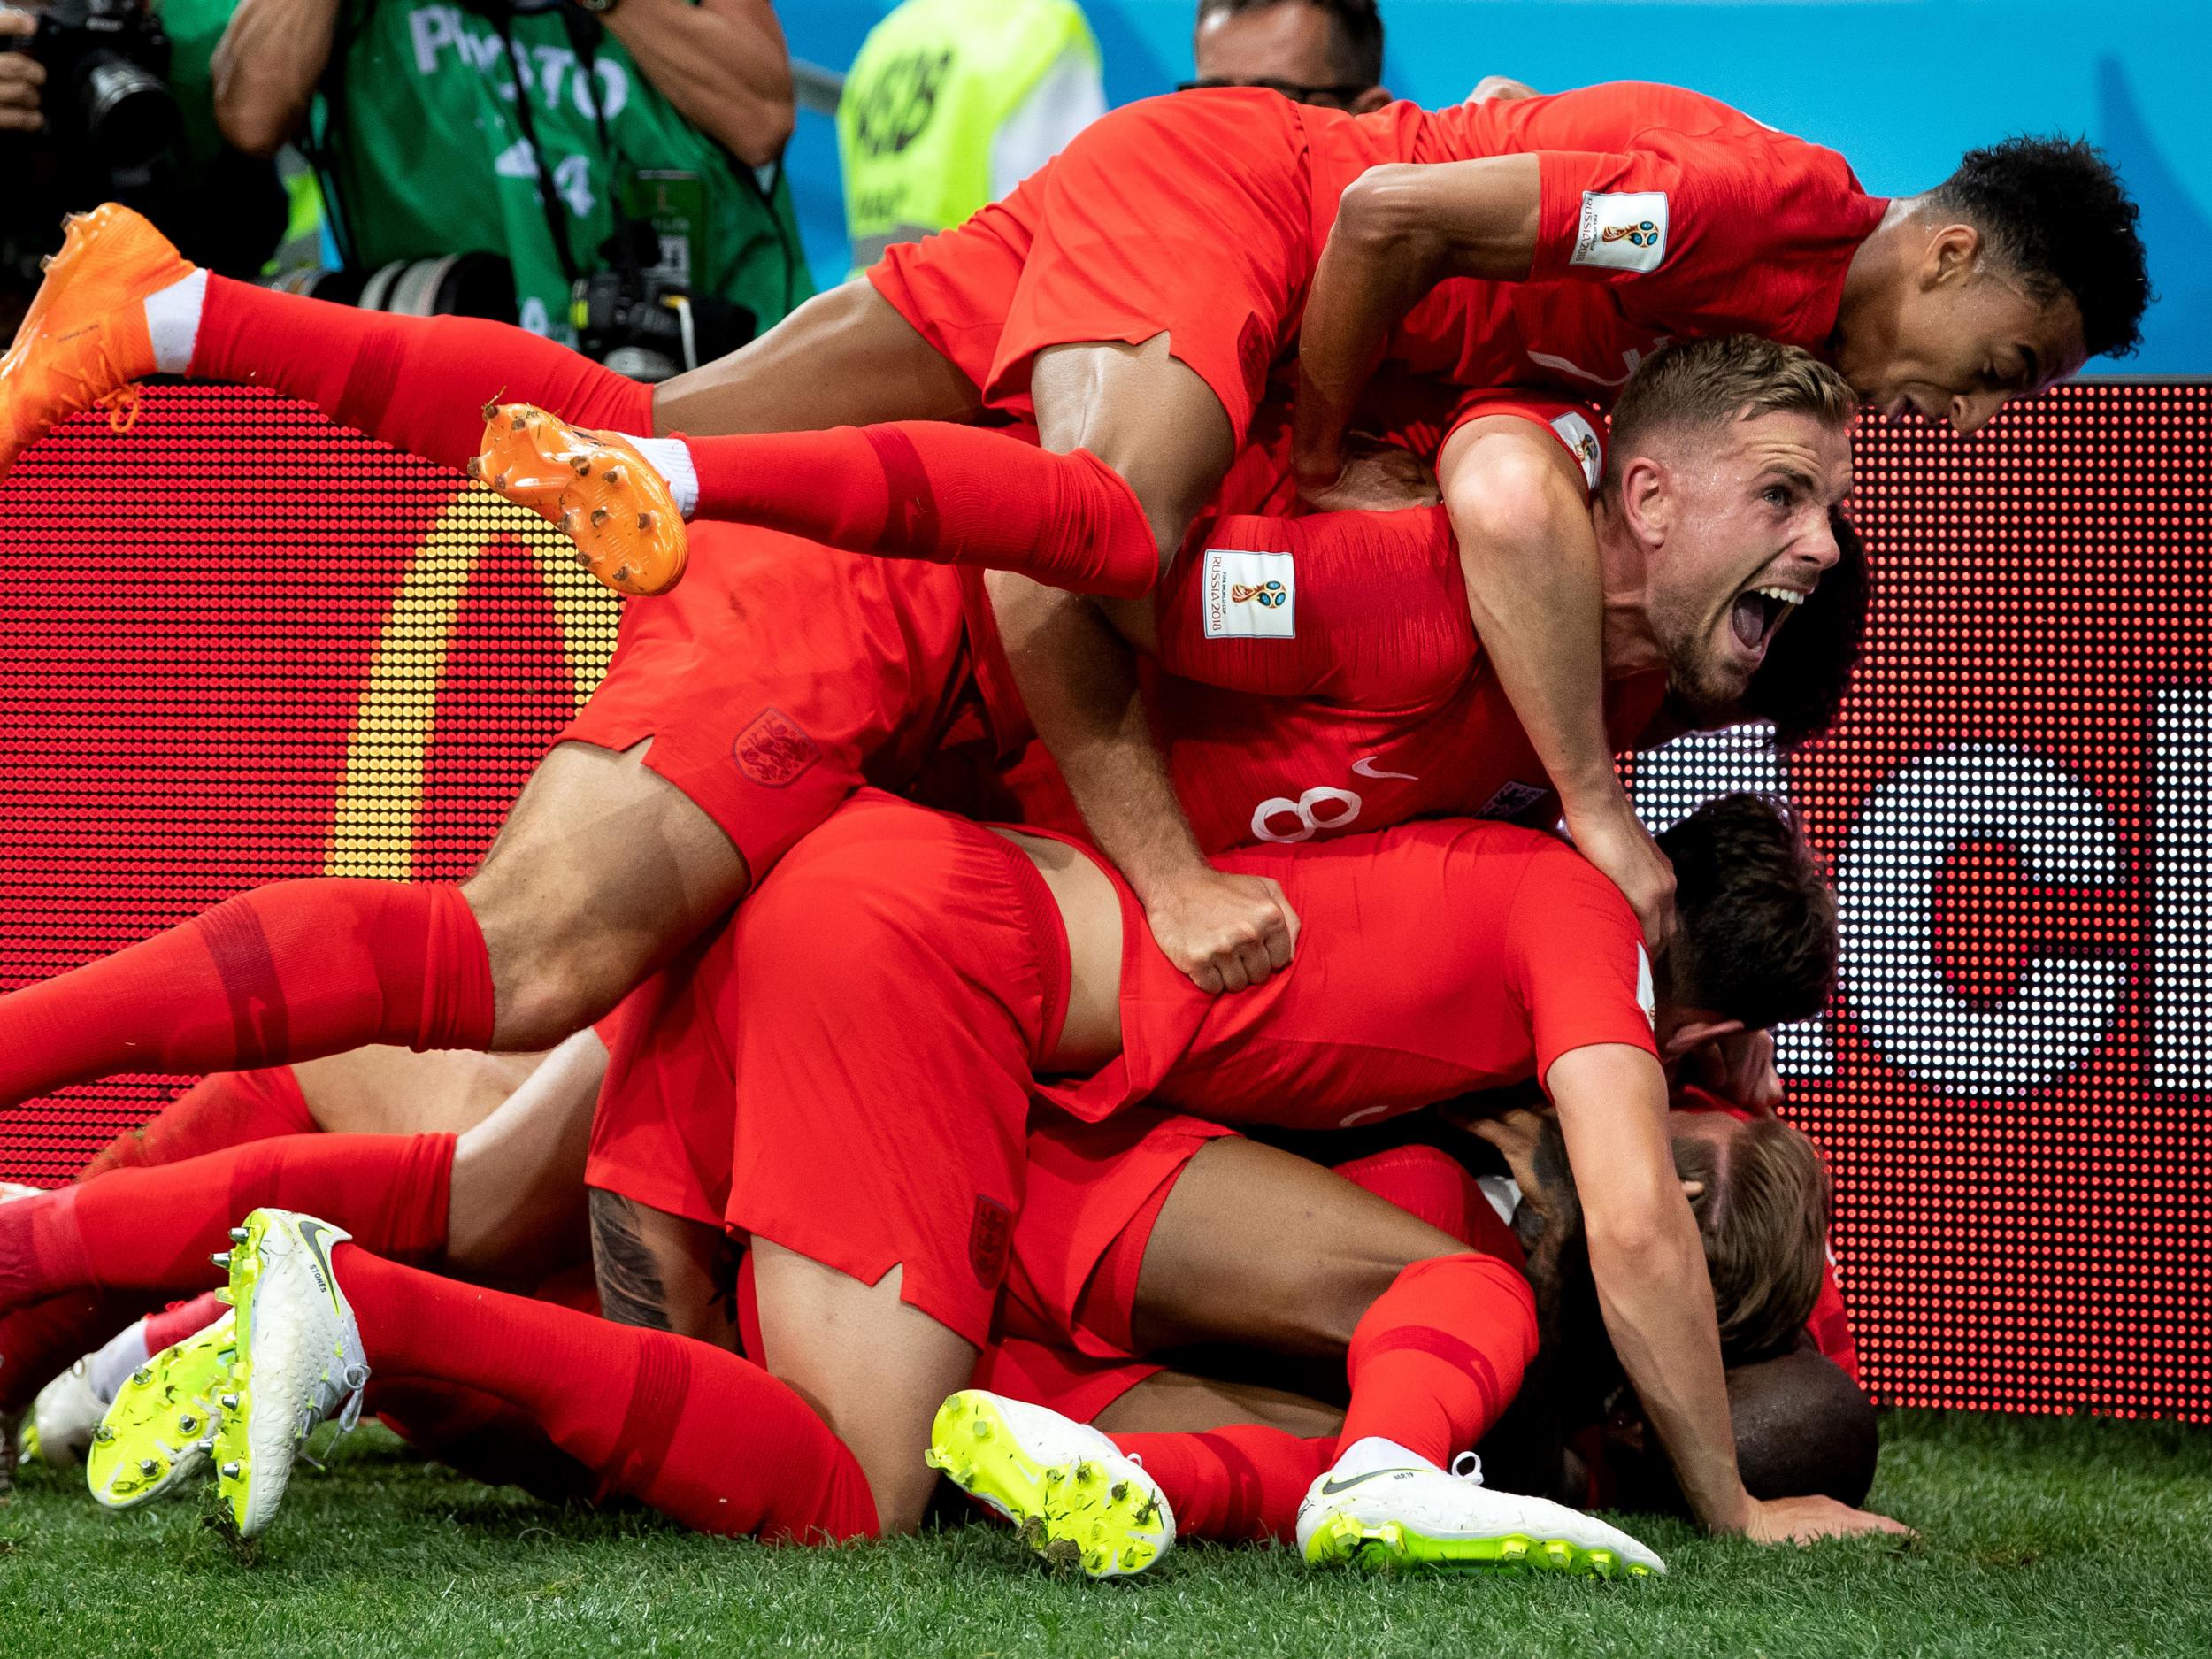 World Cup 2018 LIVE: England vs Panama latest updates, today’s fixtures